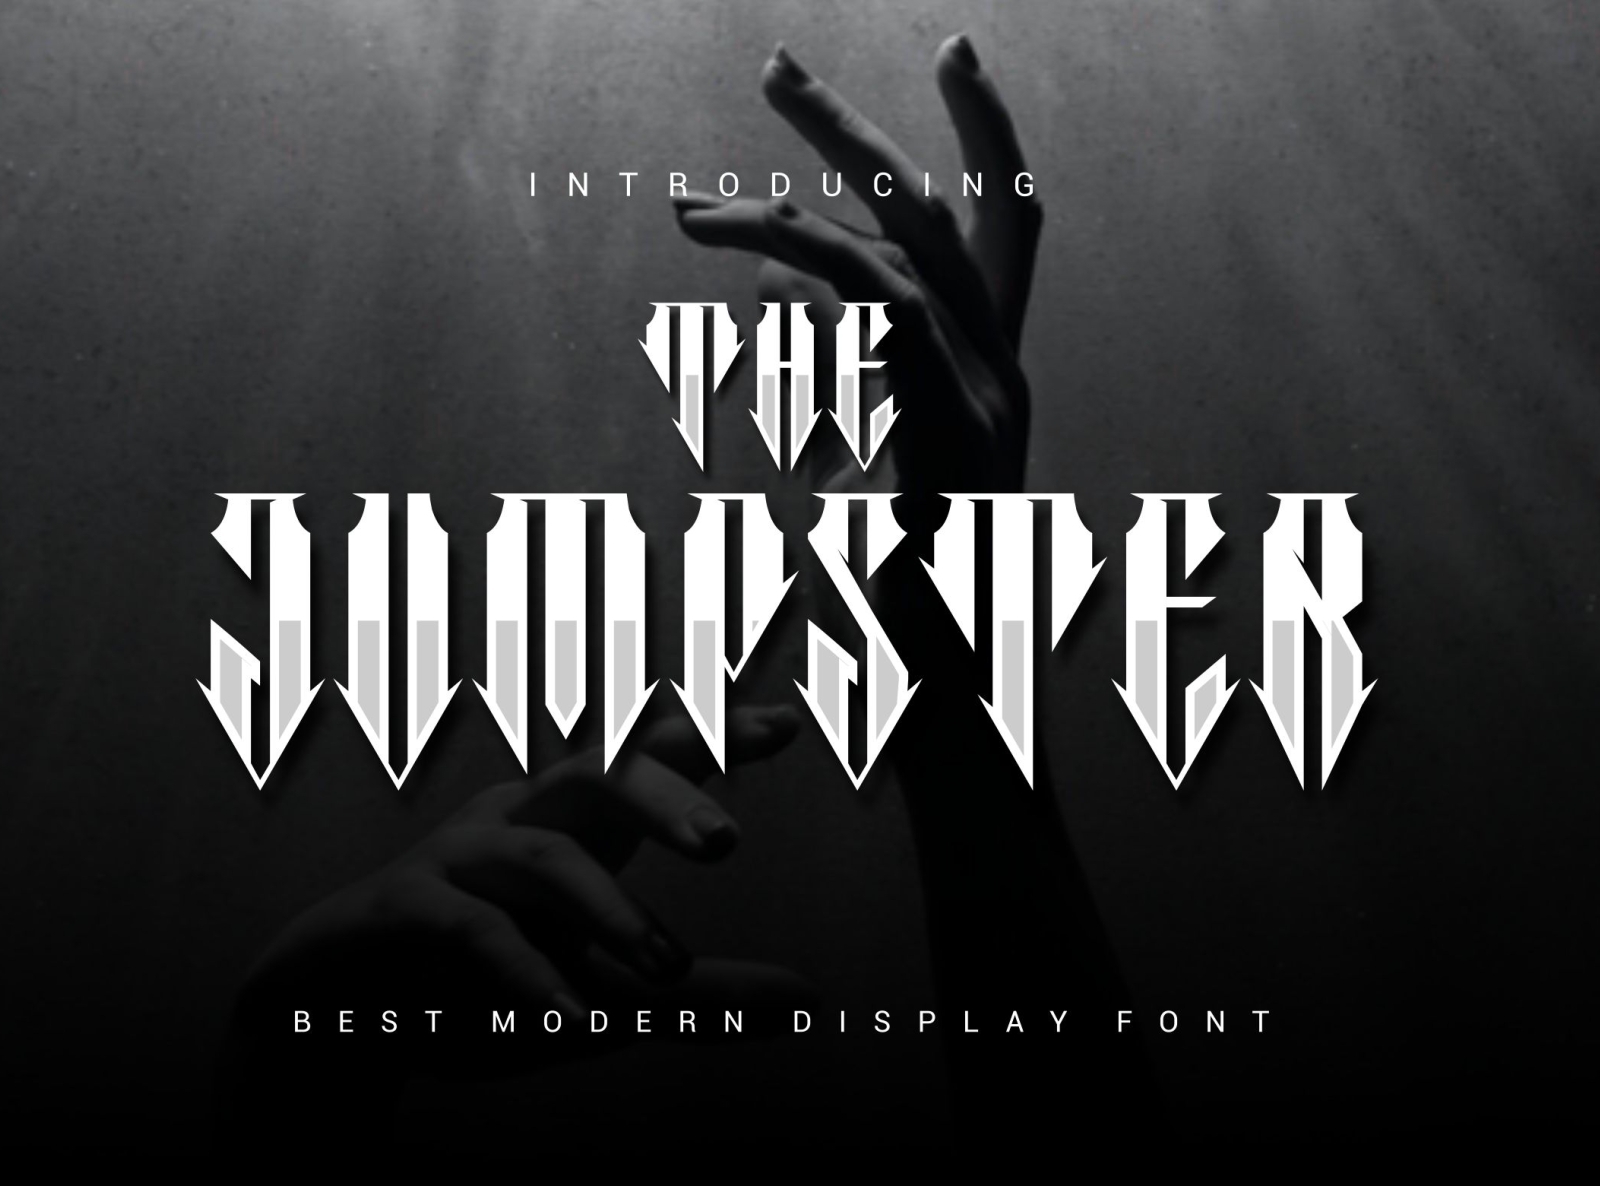 The Jumpster Font by Onotype on Dribbble